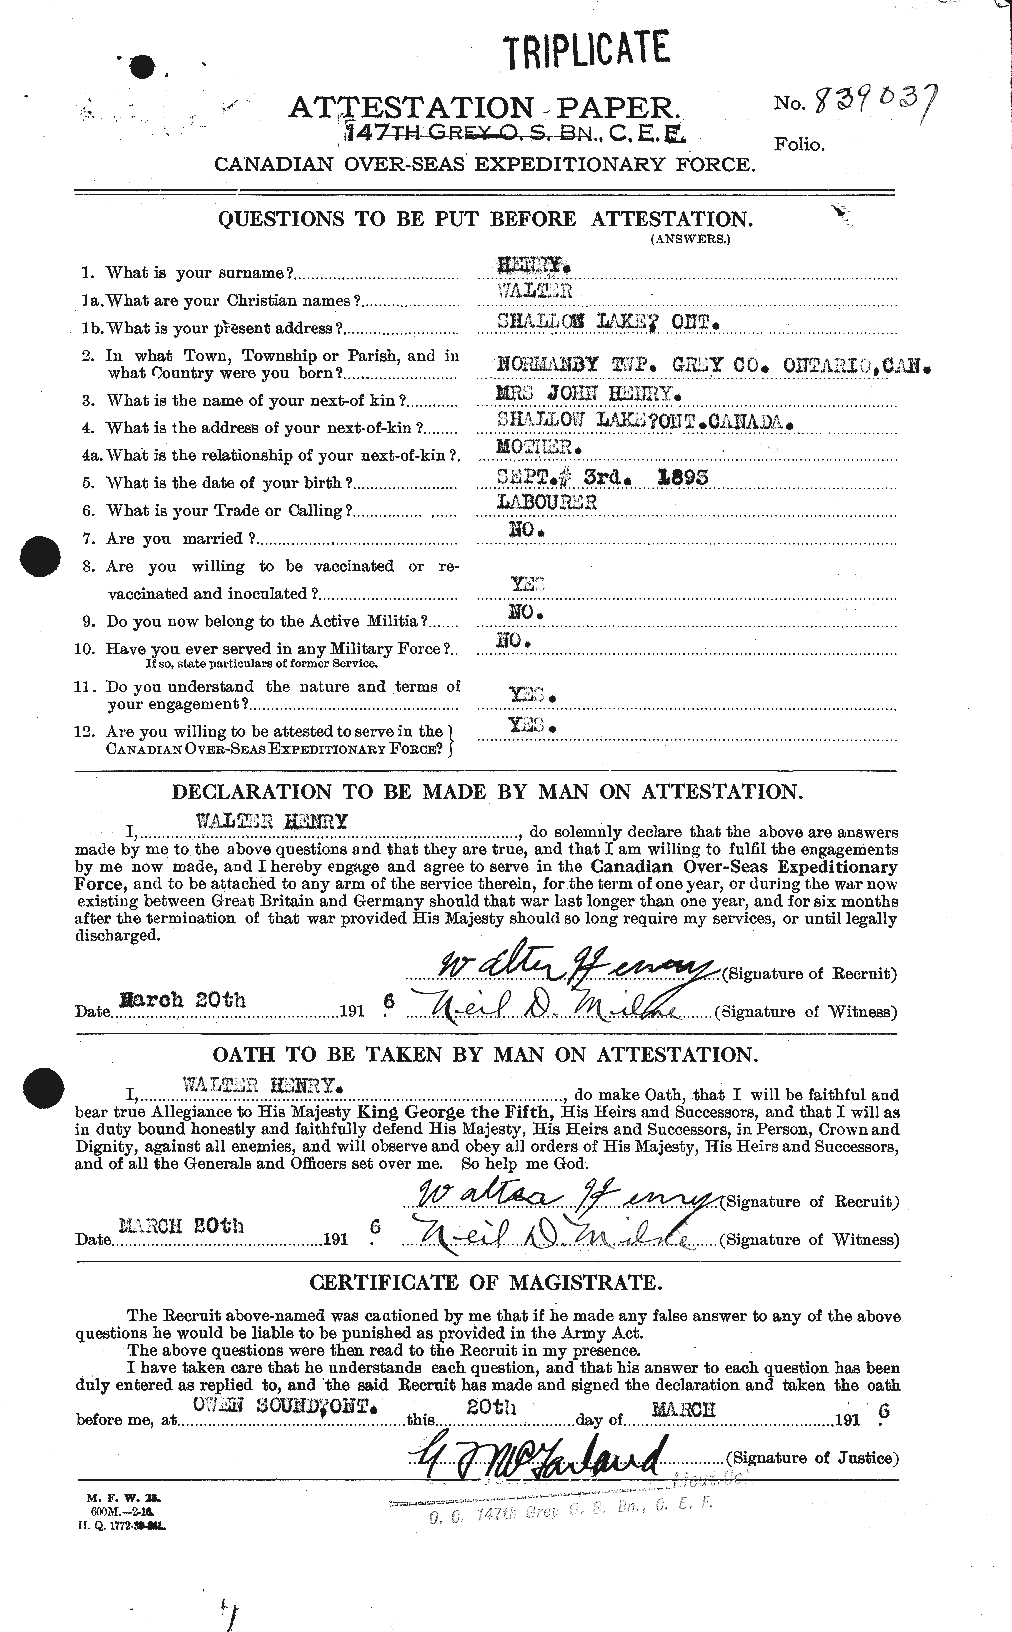 Personnel Records of the First World War - CEF 387751a